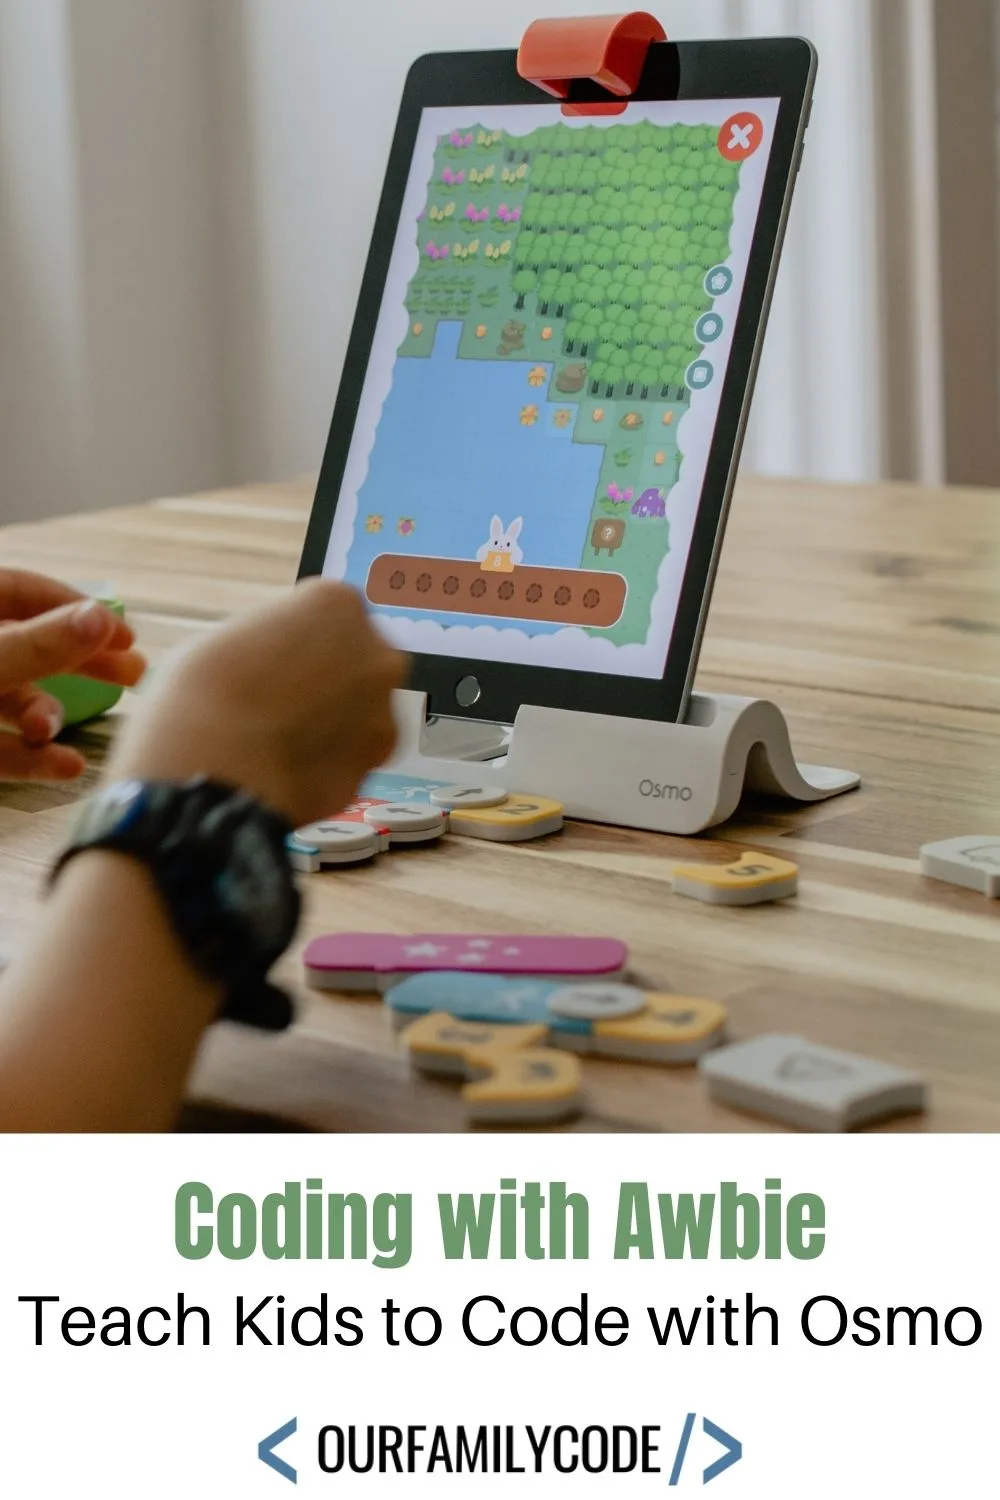 A picture of a kid playing Coding Awbie game from Osmo with text that says "Coding with Awbie Teach Kids to Code with Osmo" over a white rectangle.